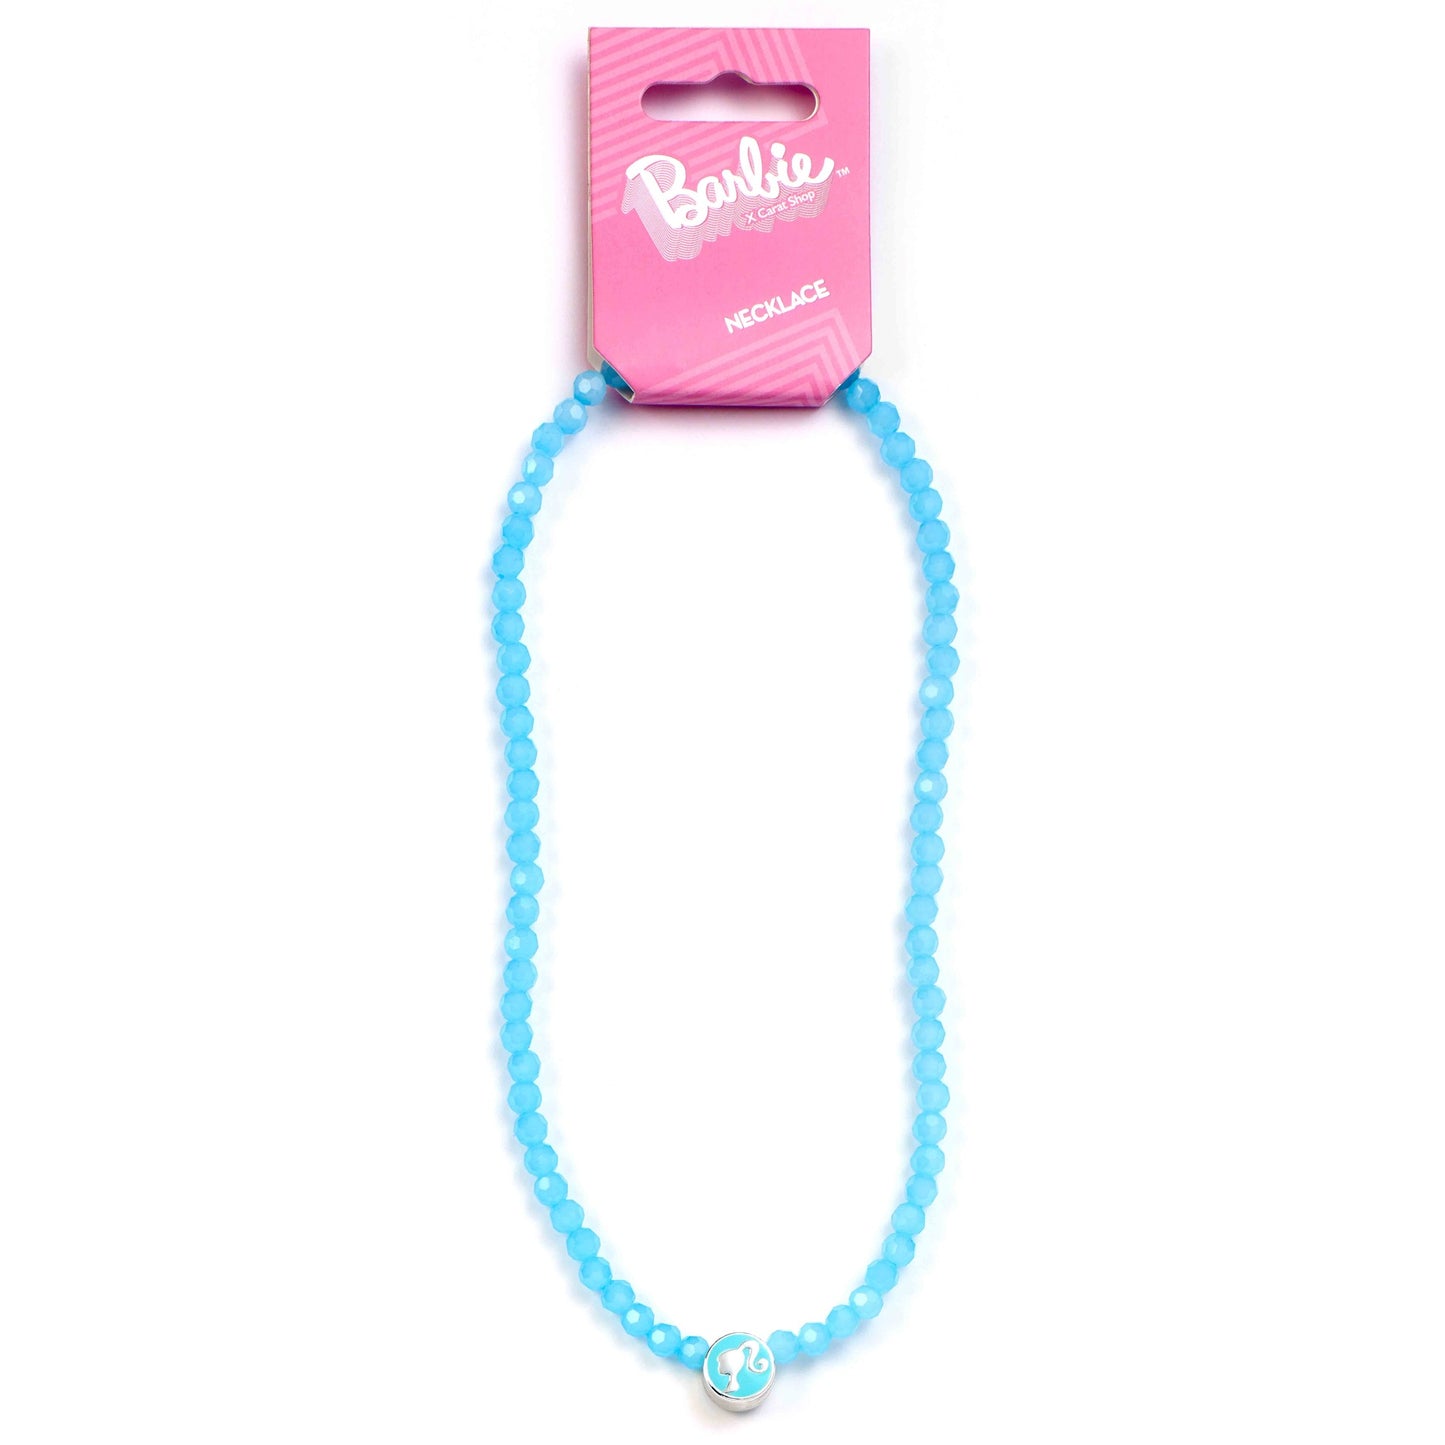 Barbie™️ Blue Bead Necklace with Barbie Silhouette Charm